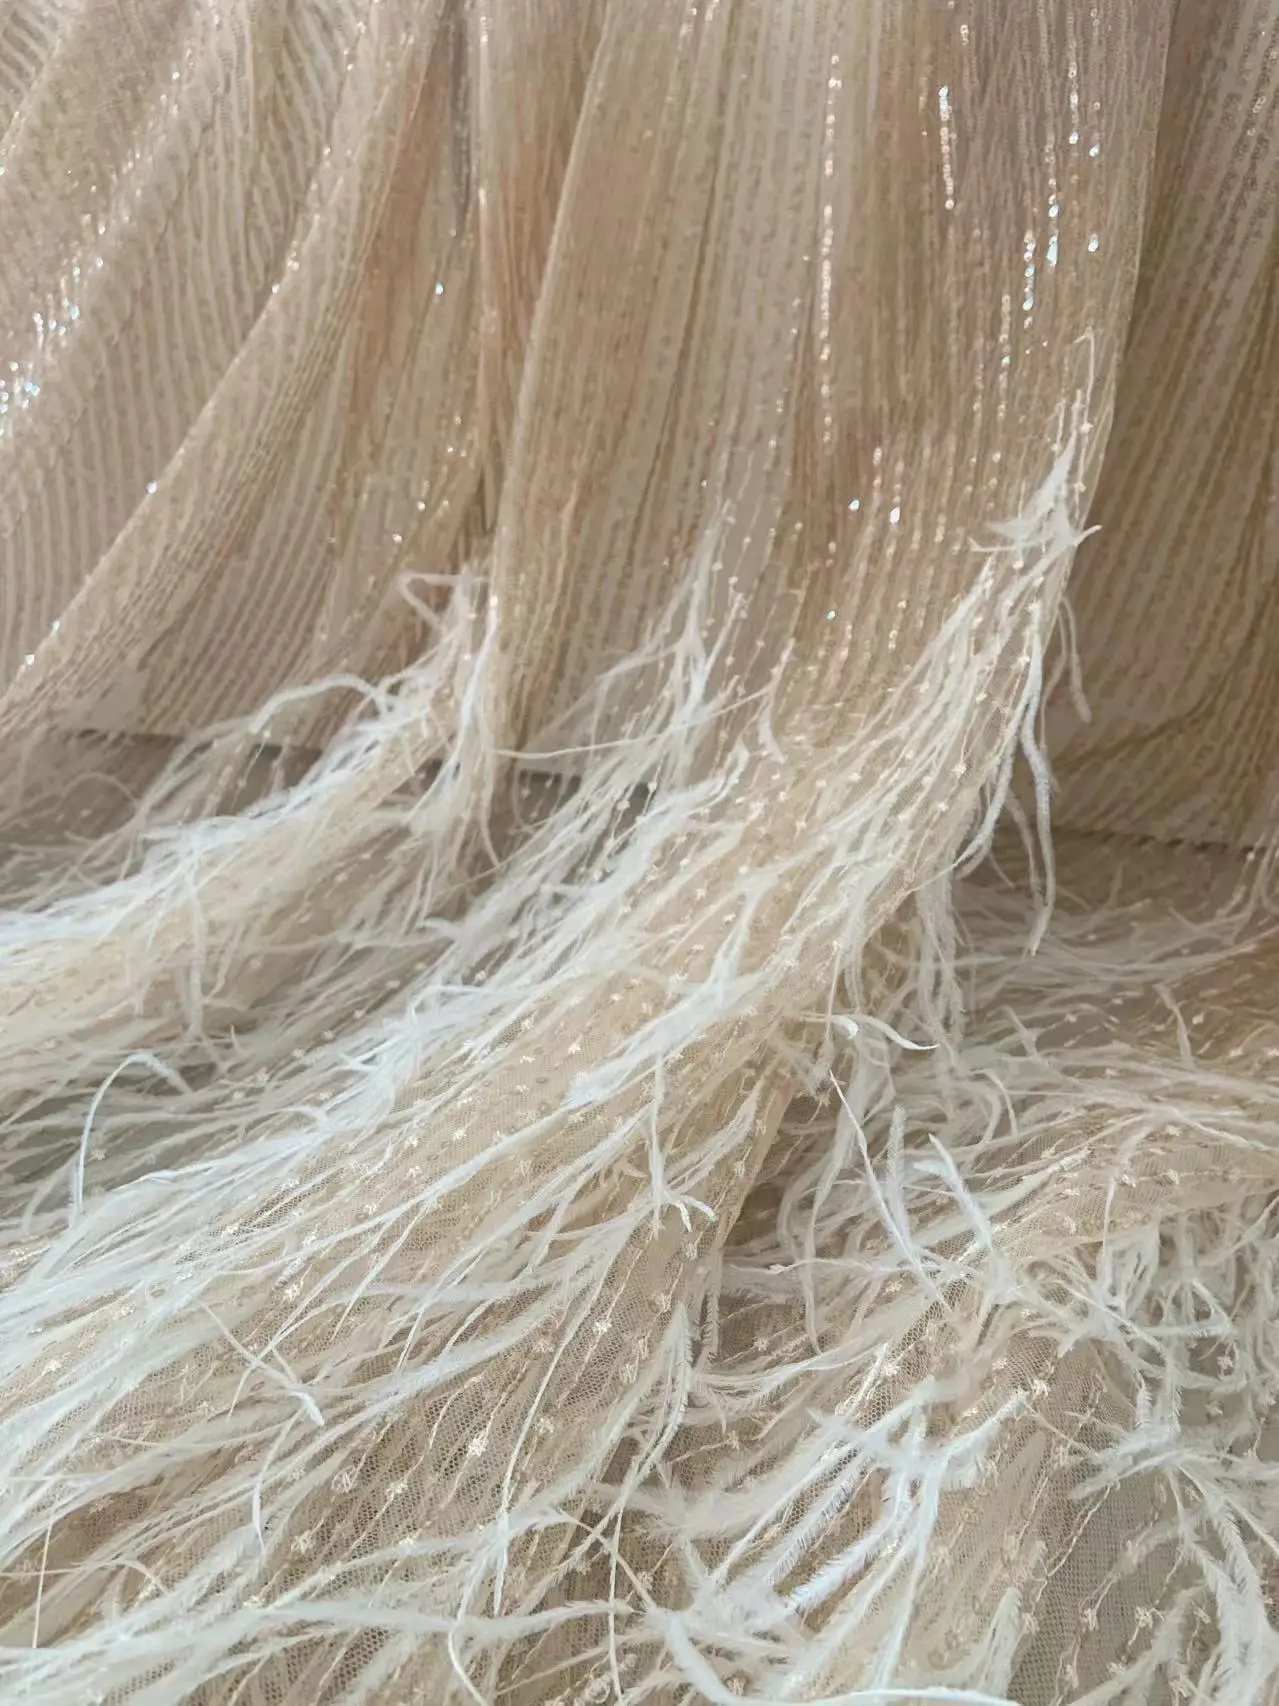 Tulle in Shimmering Salmon Pink - All About Fabrics